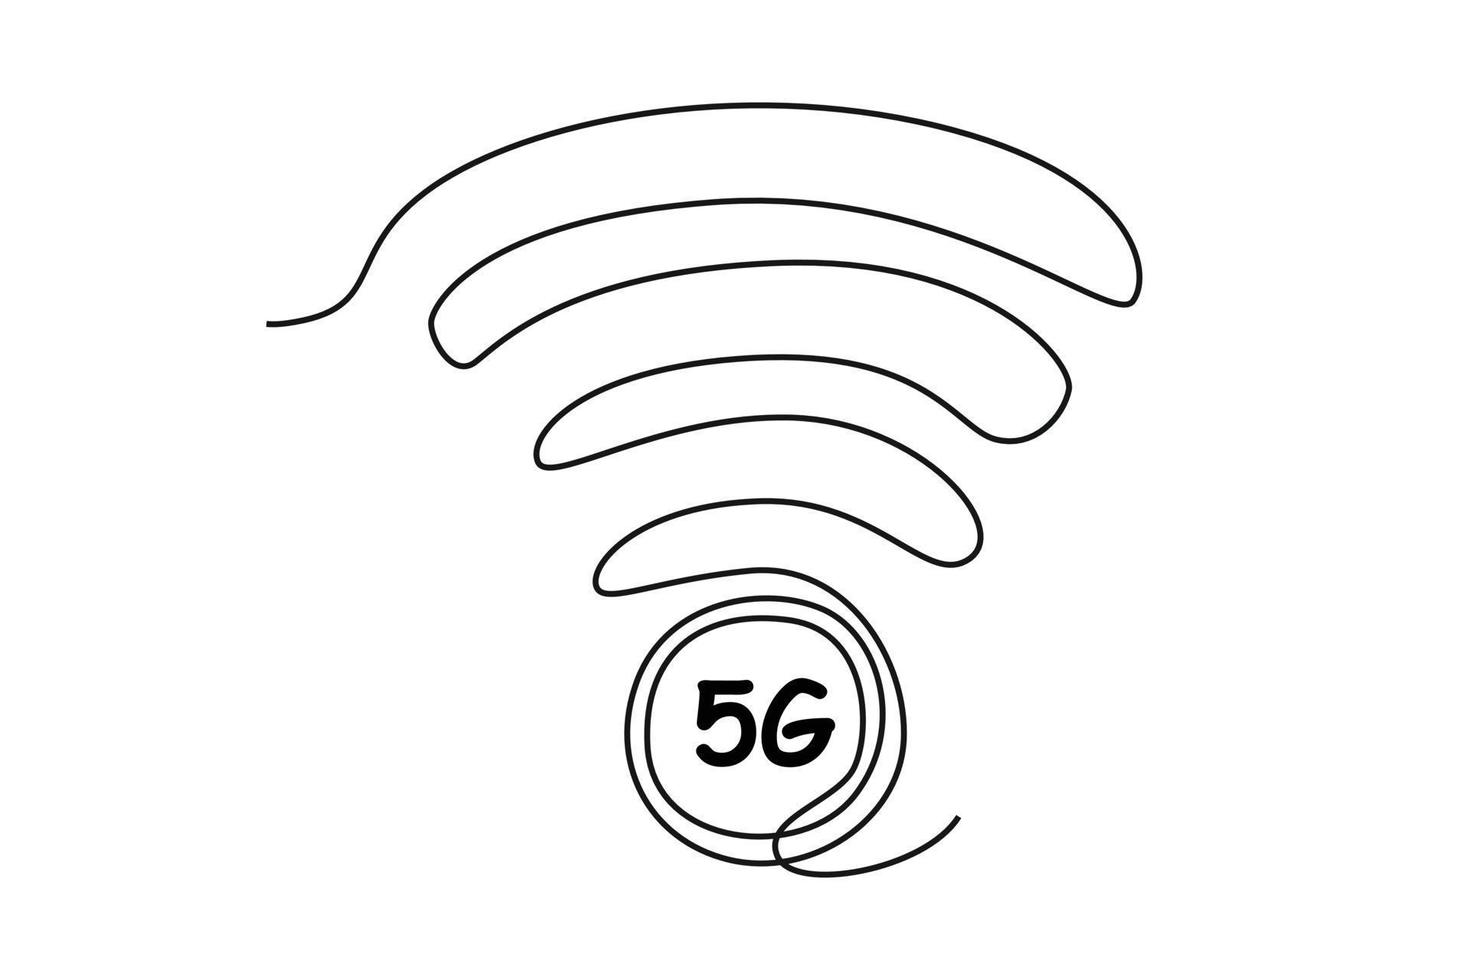 Continuous one line drawing 5G network. High-speed mobile Internet. 5G technology concept. Single line draw design vector graphic illustration.